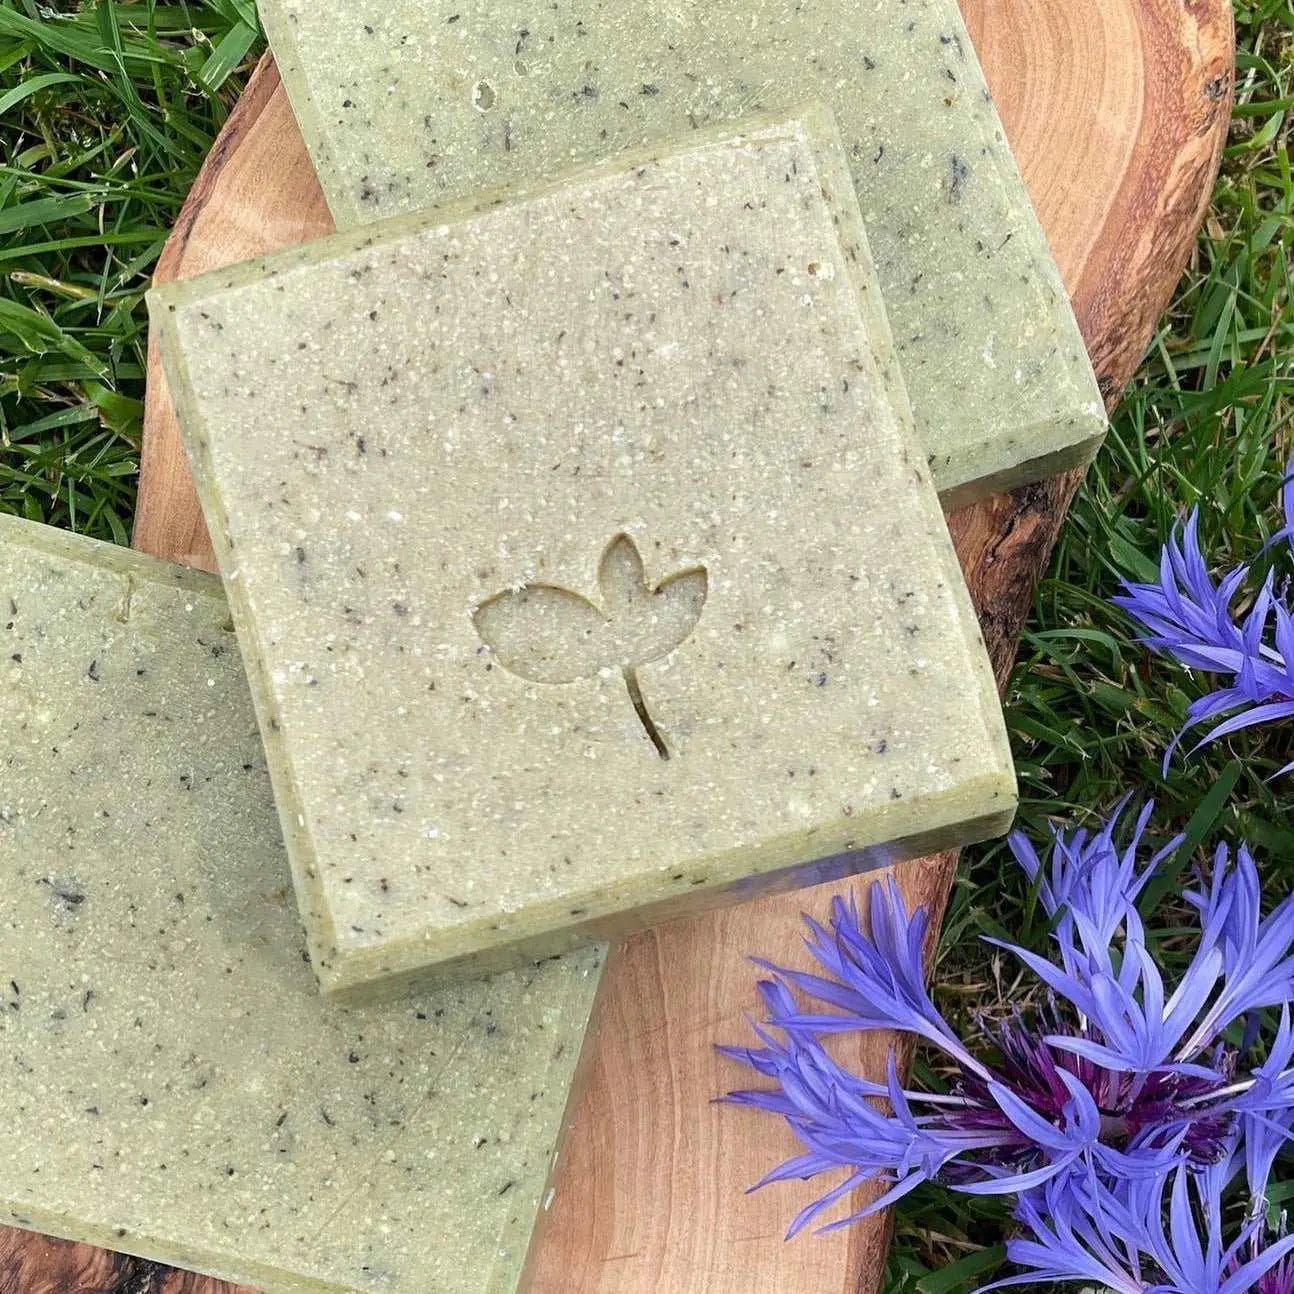 Persephone - natural soap with chamomile, rosemary and nettle - Silktown Soap Company